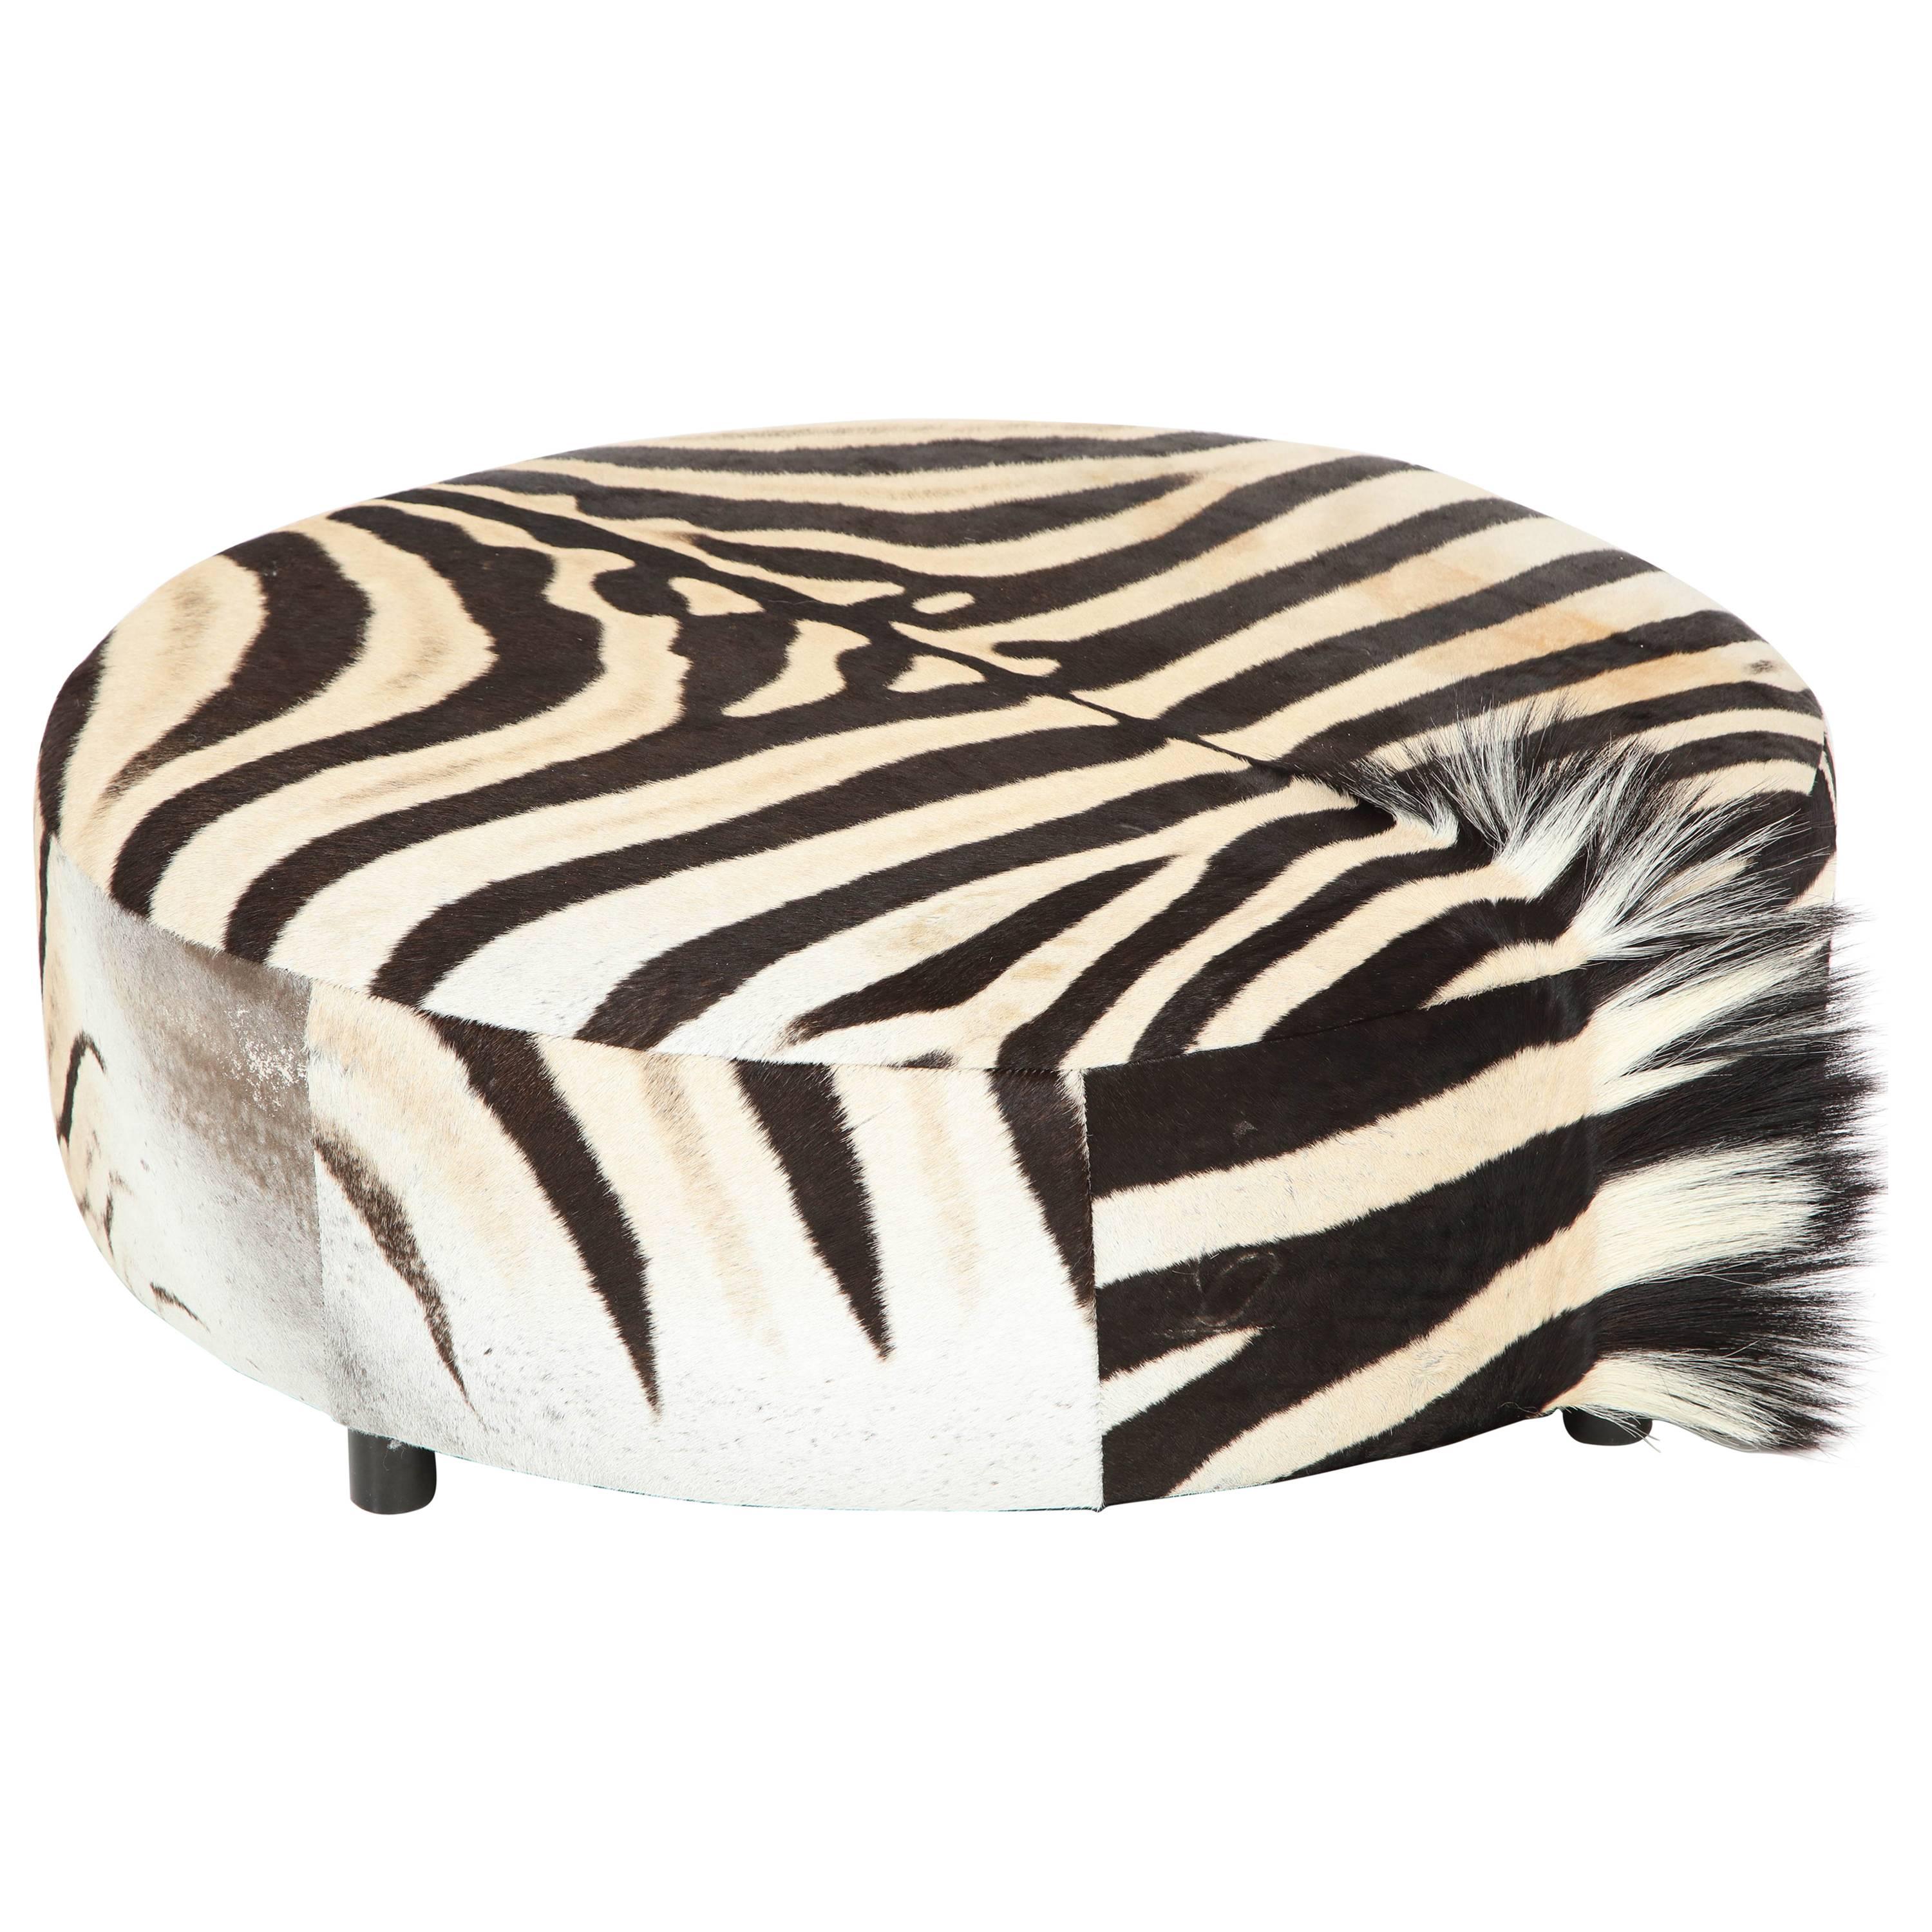 Zebra Hide Ottoman, Offered by Area ID